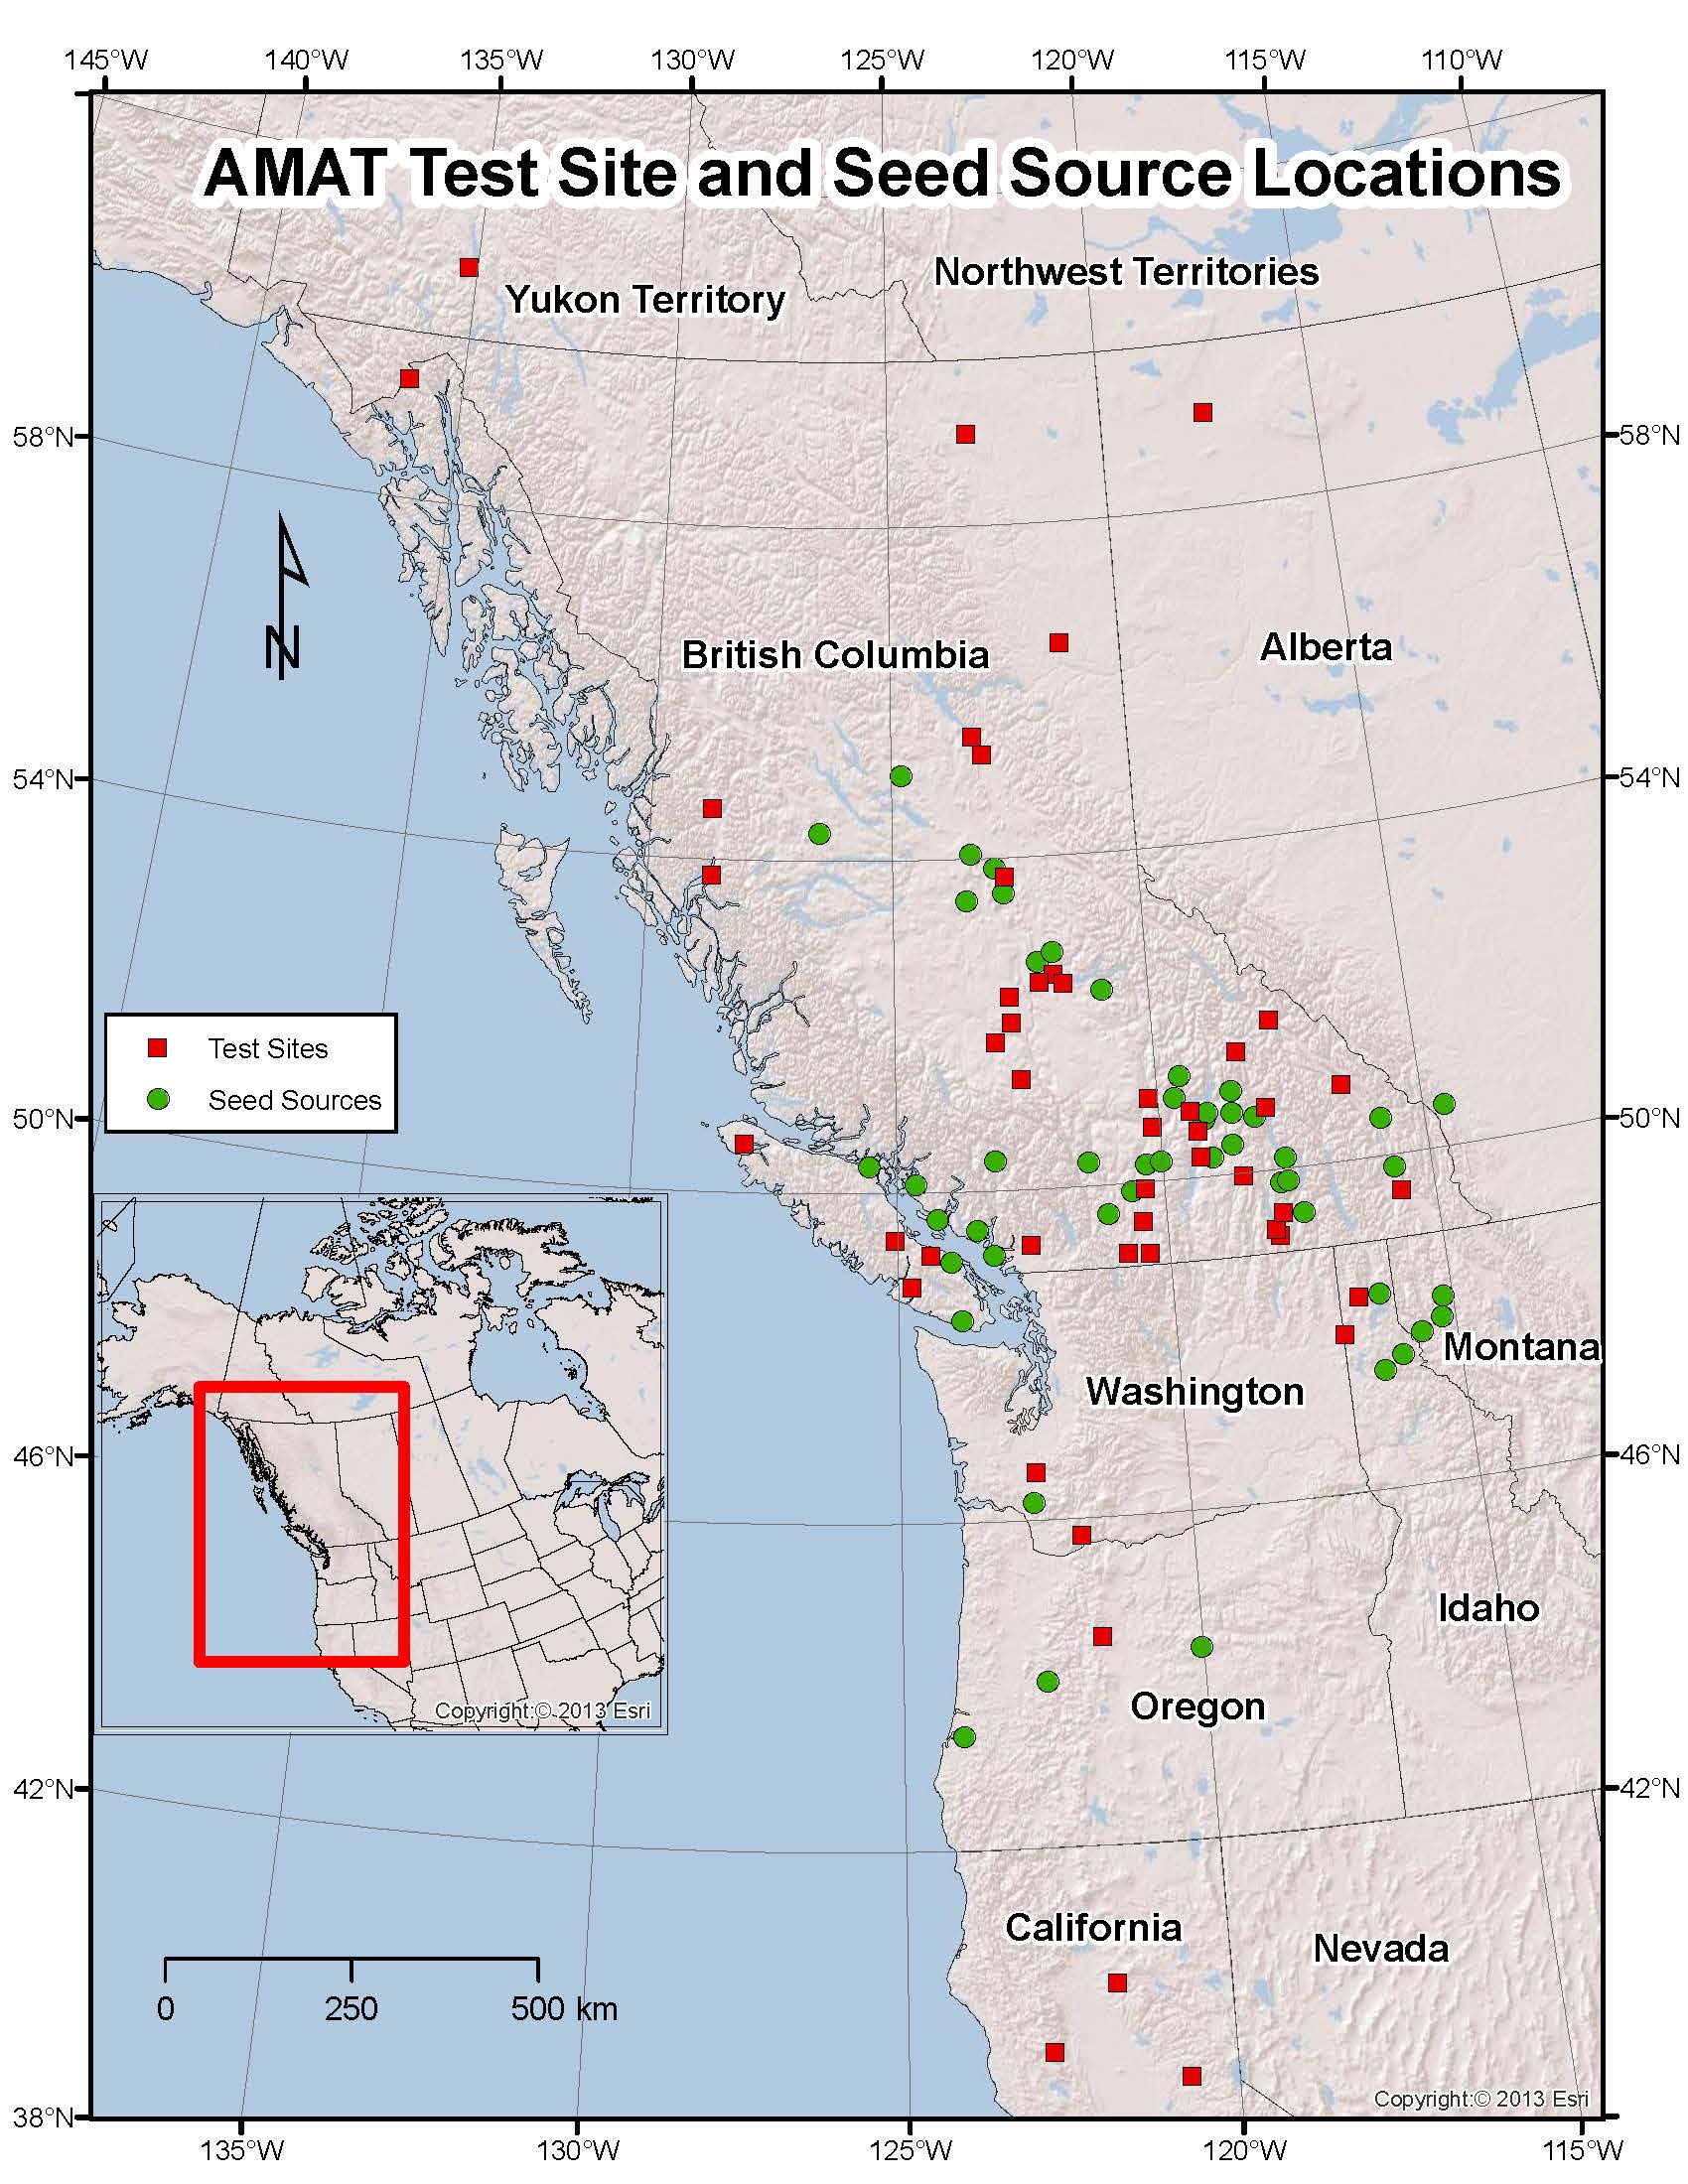 AMAT Test Site and Seed Source Locations as of December 2013